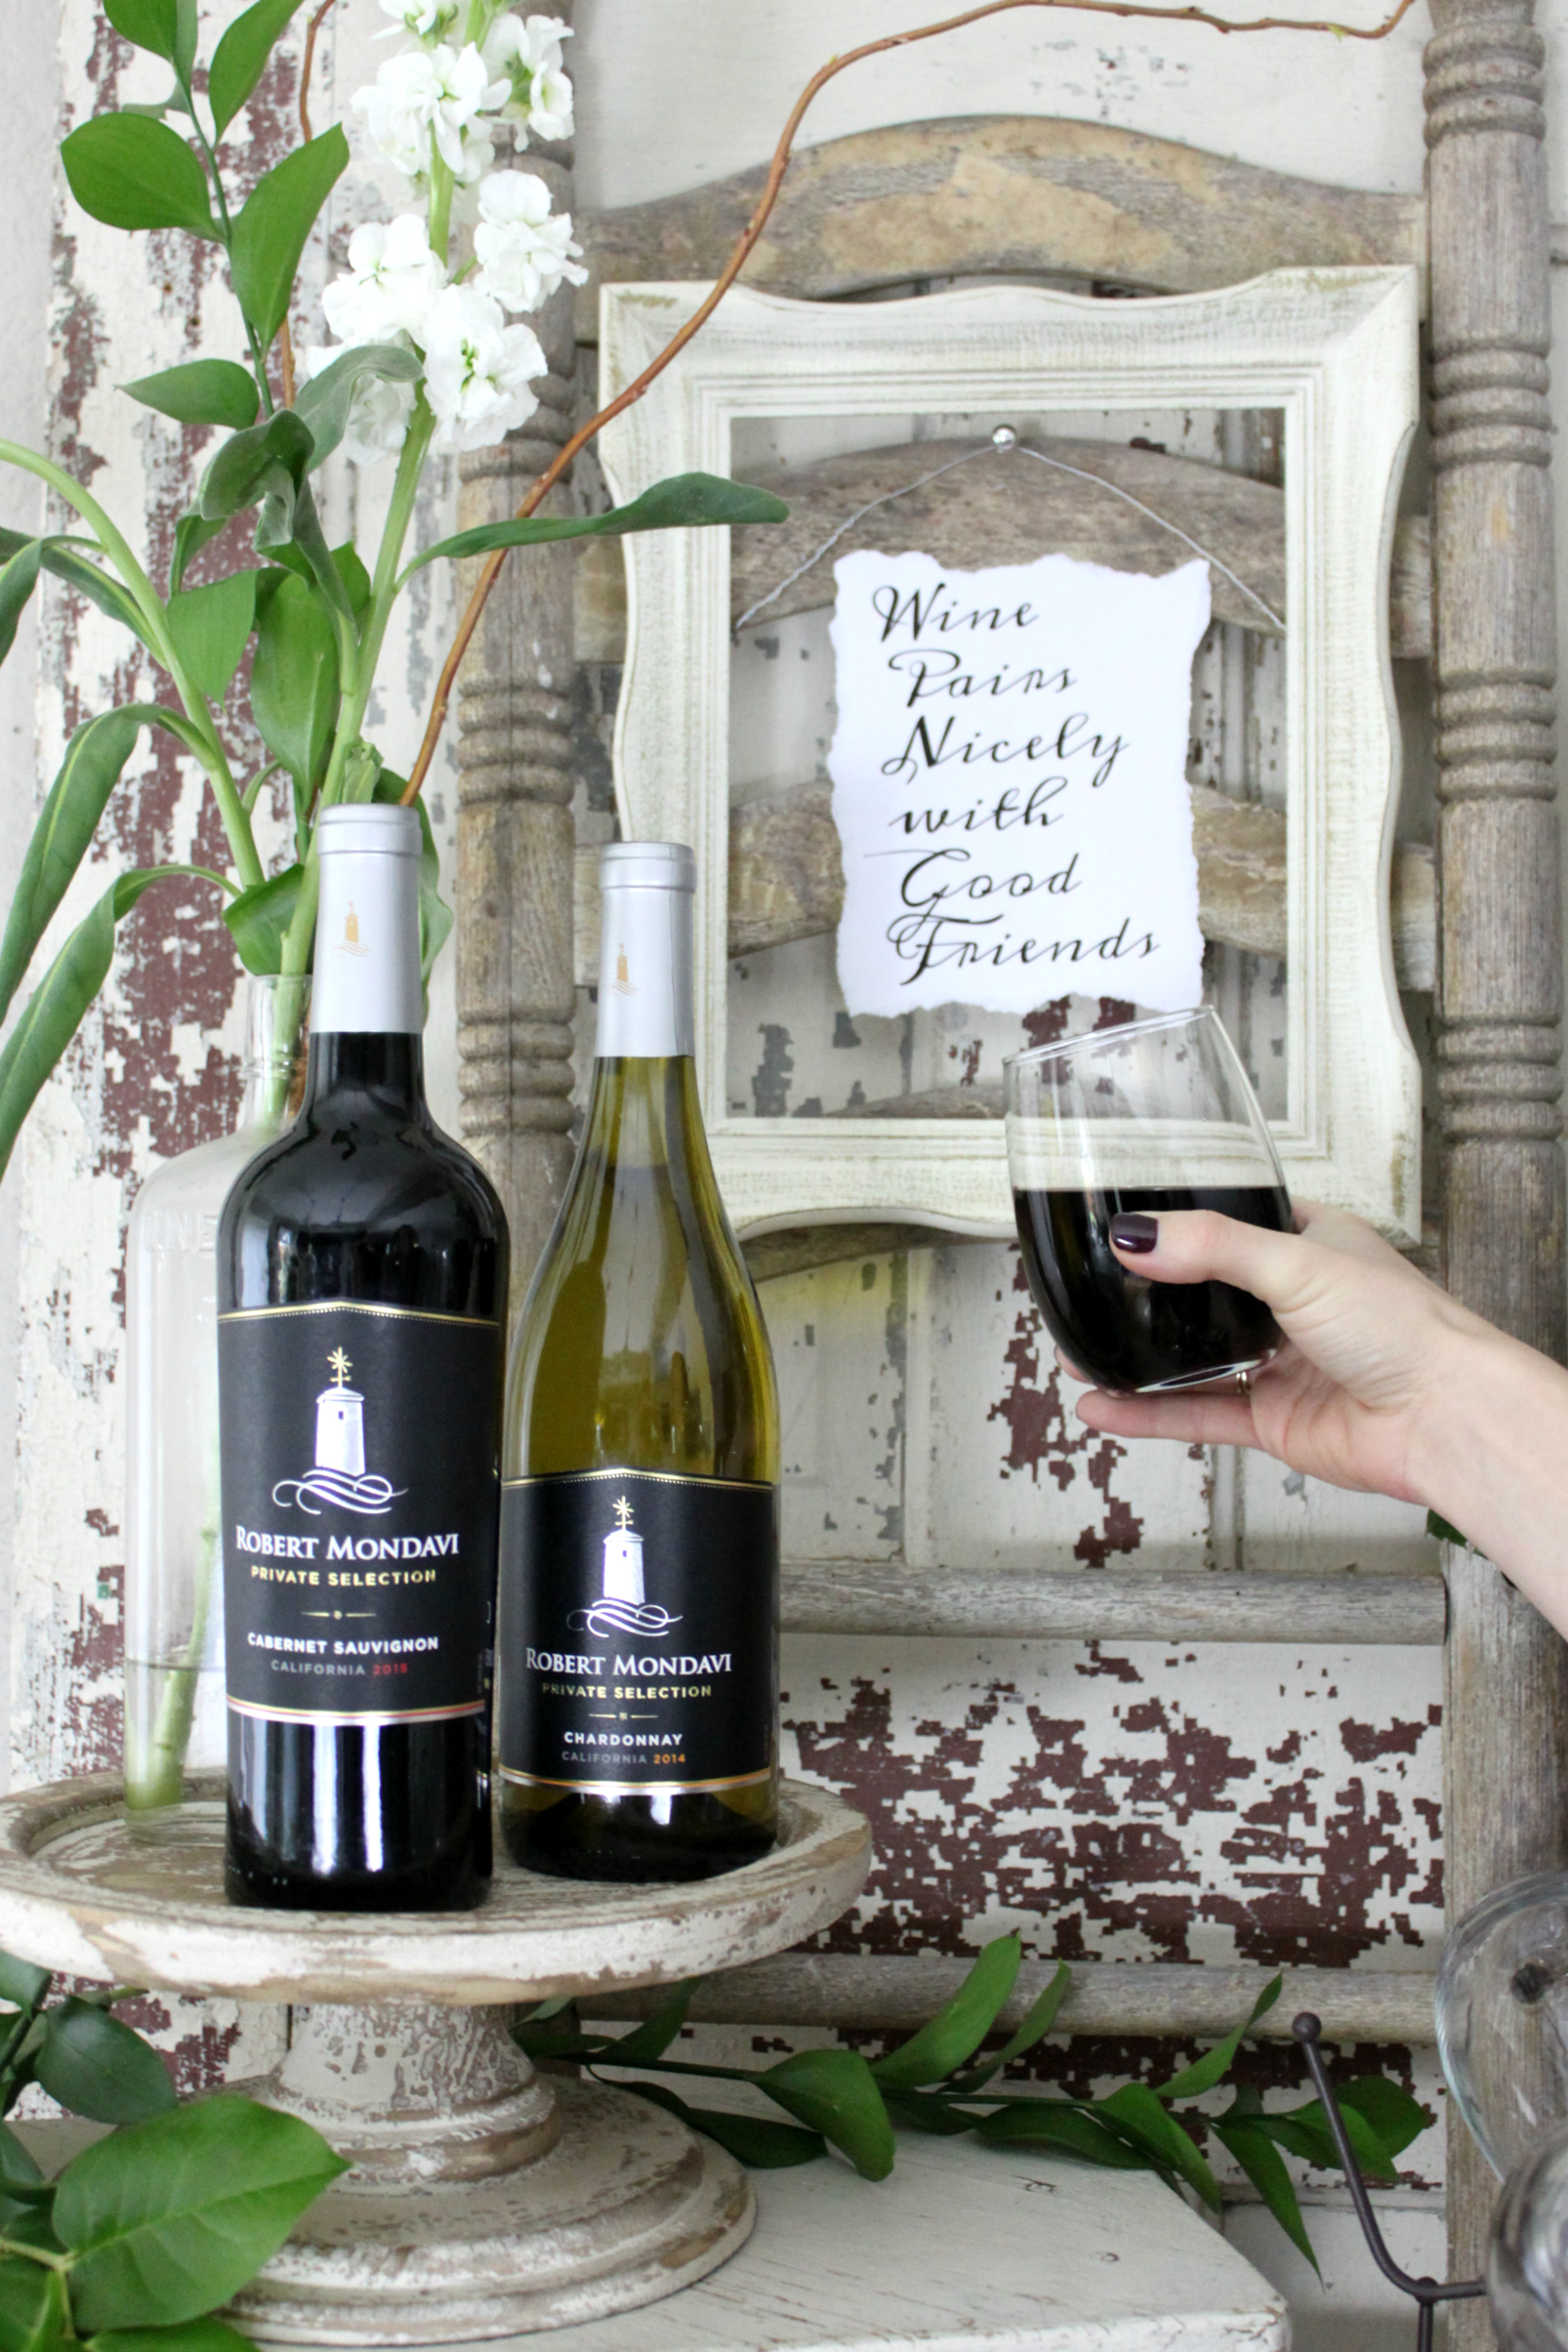 Wine Pairs Nicely with Good Friends by An Inspired Nest